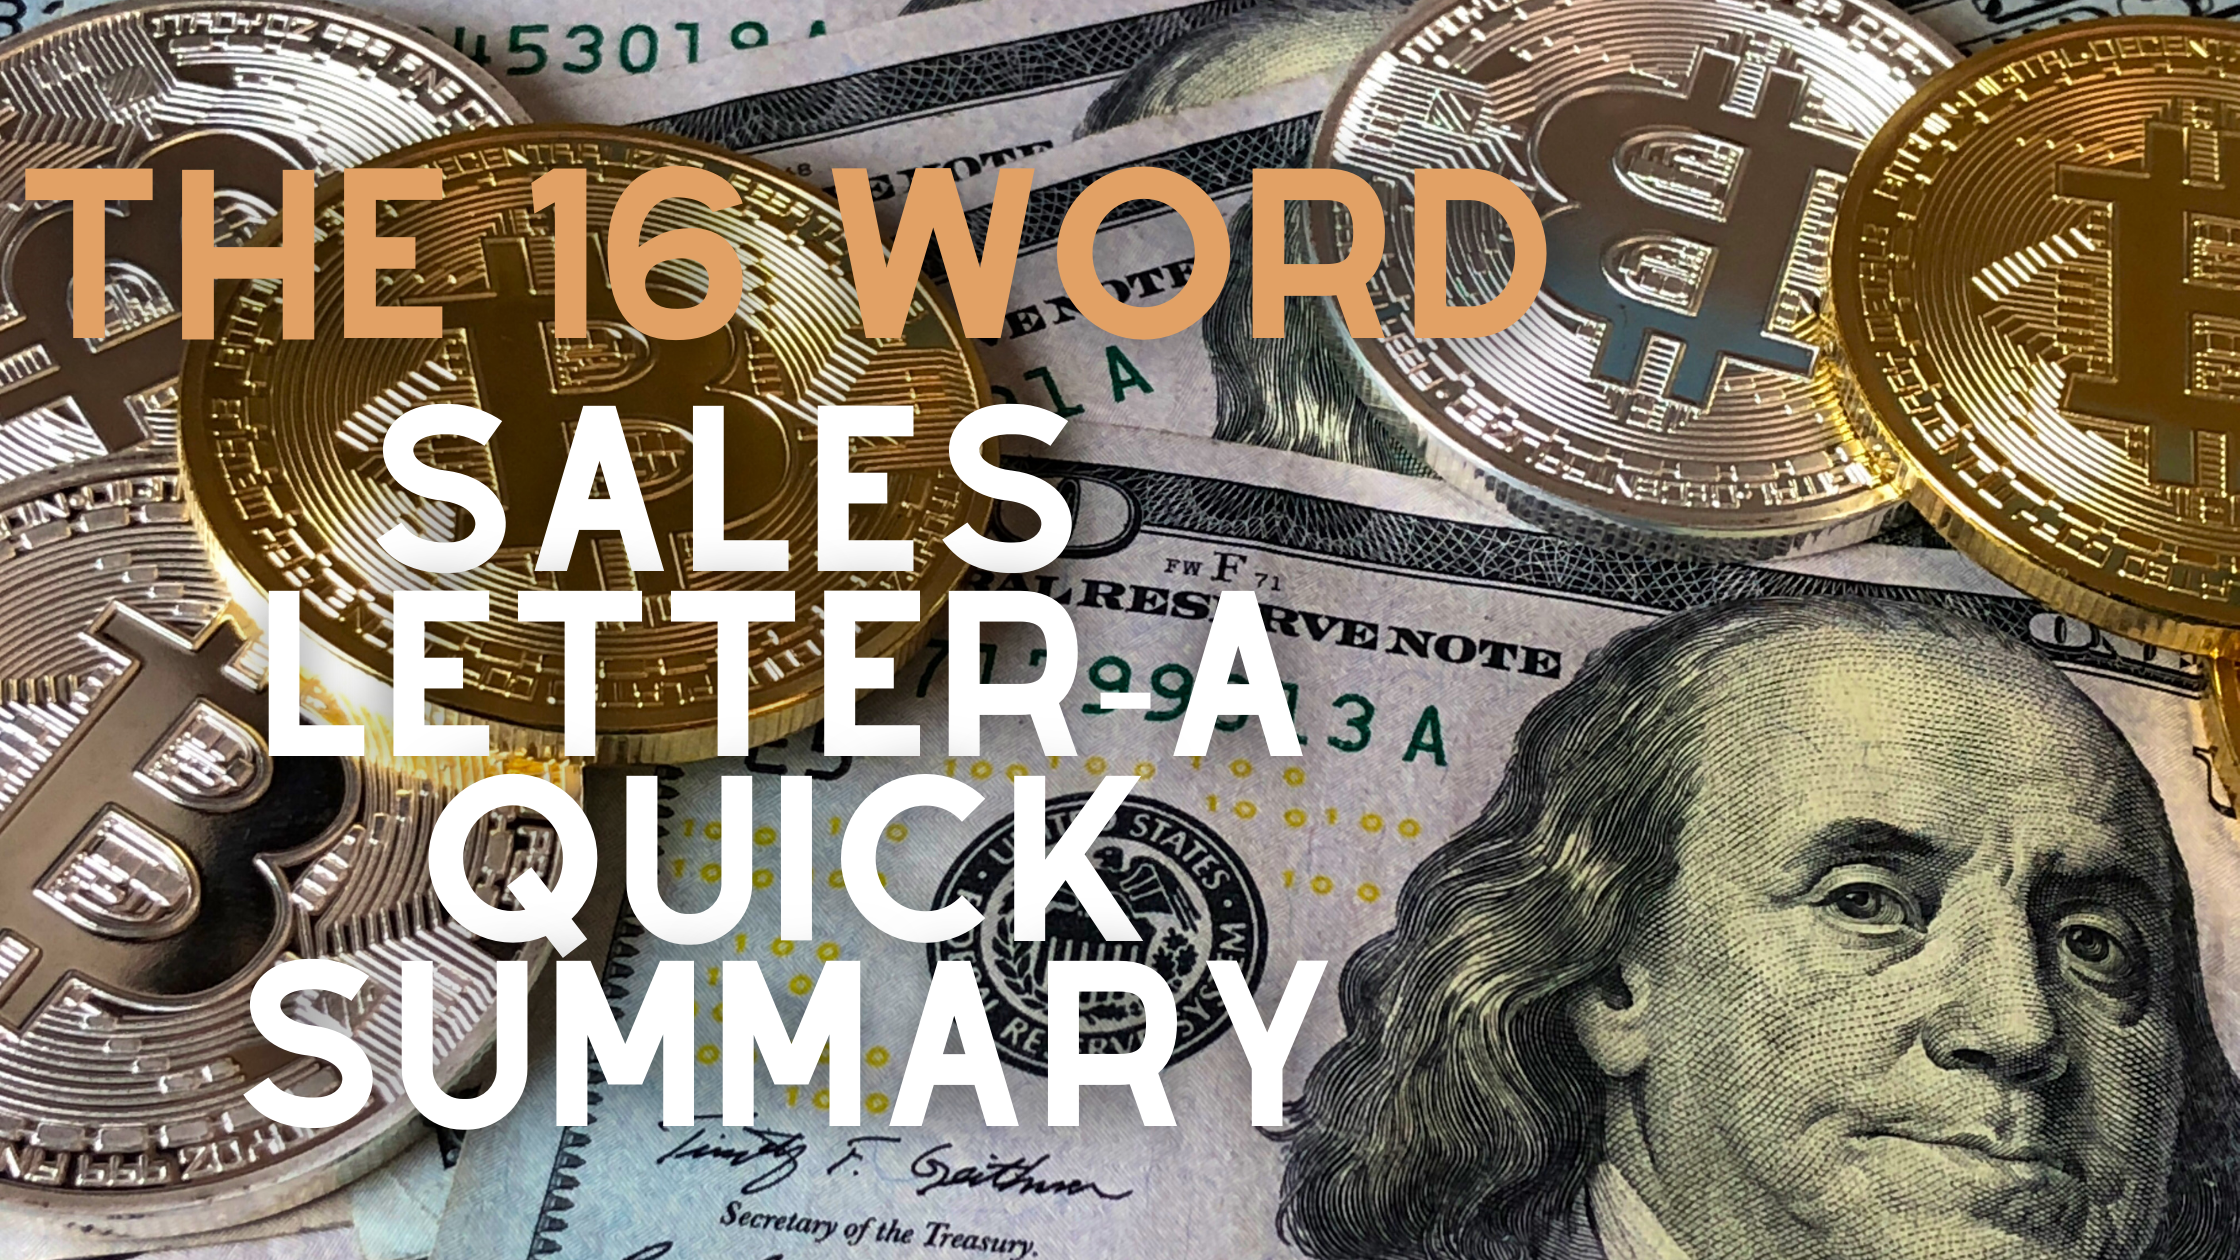 THE 16 WORD SALES LETTER